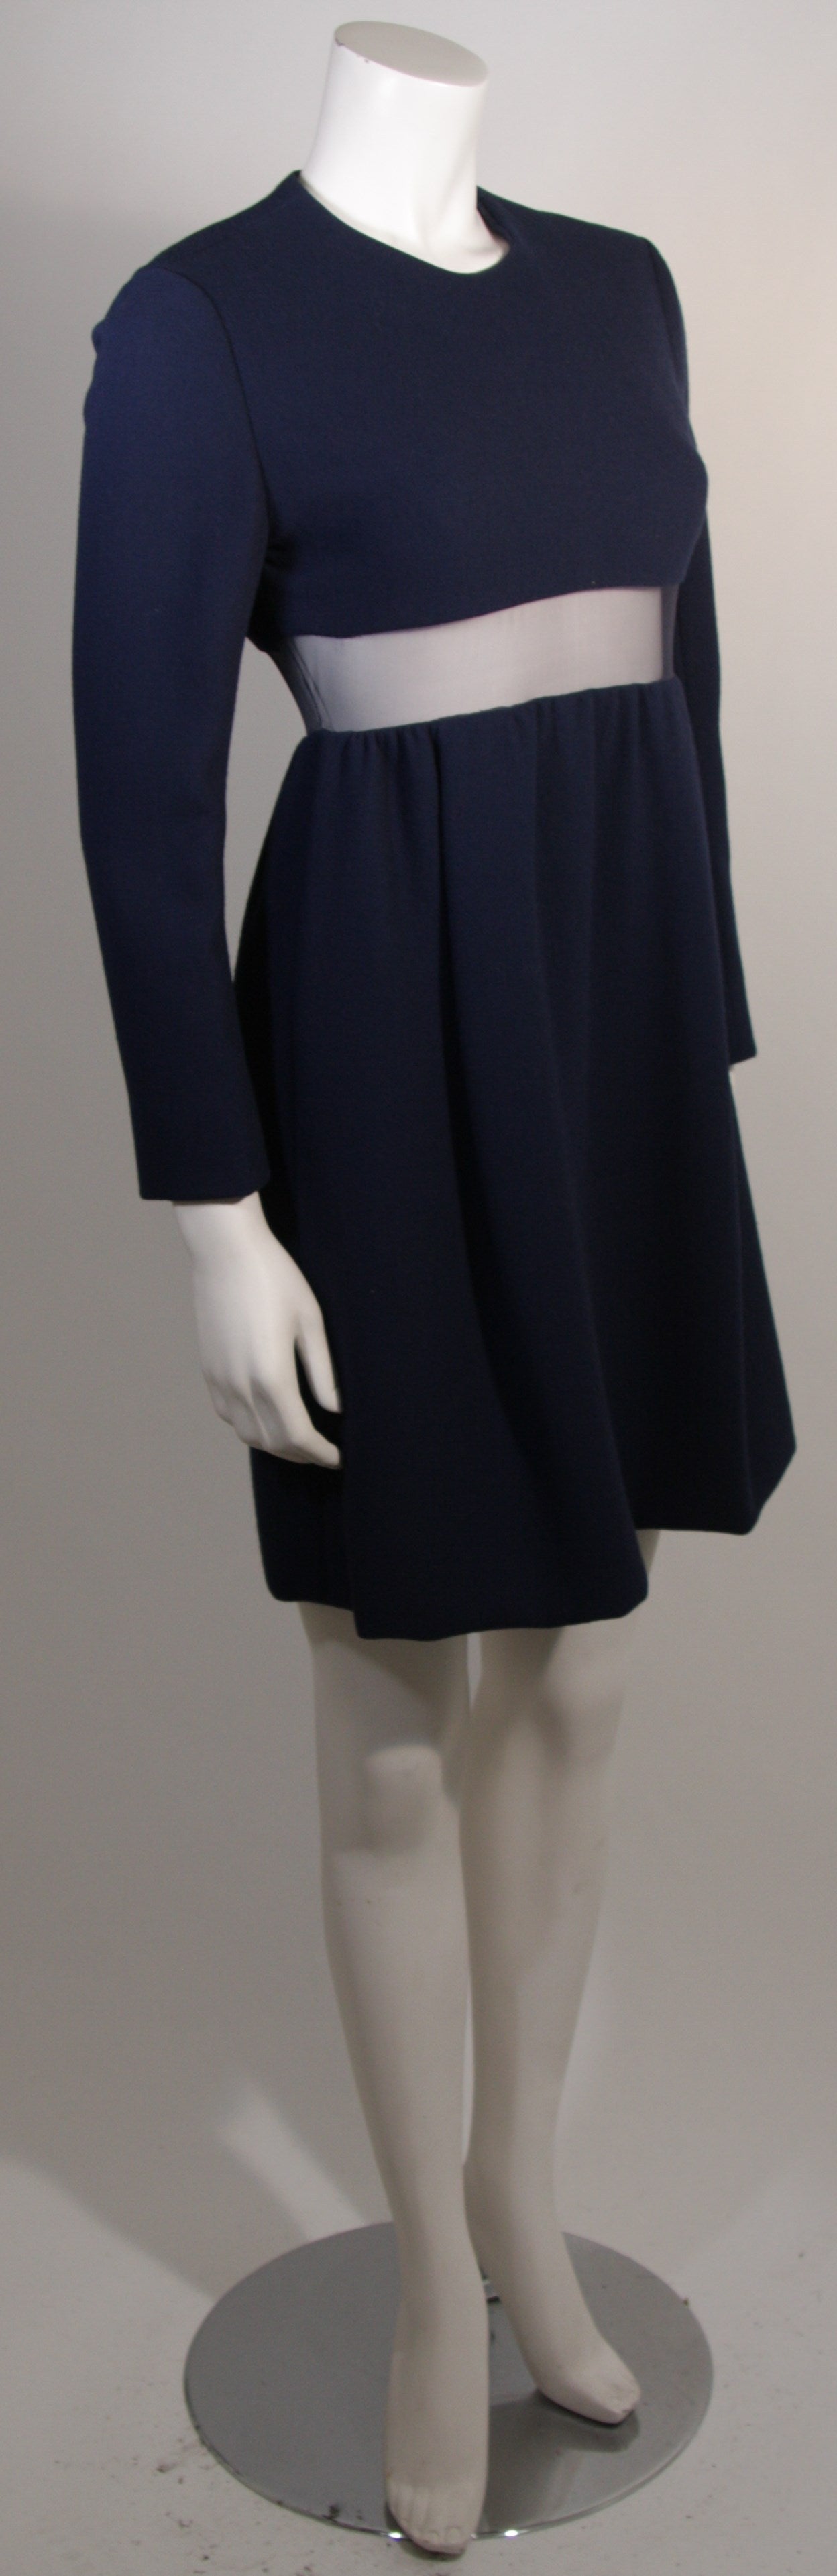 Black Galanos Navy Wool Mini Dress with Peek-a-boo Mesh Panel size 4 For Sale